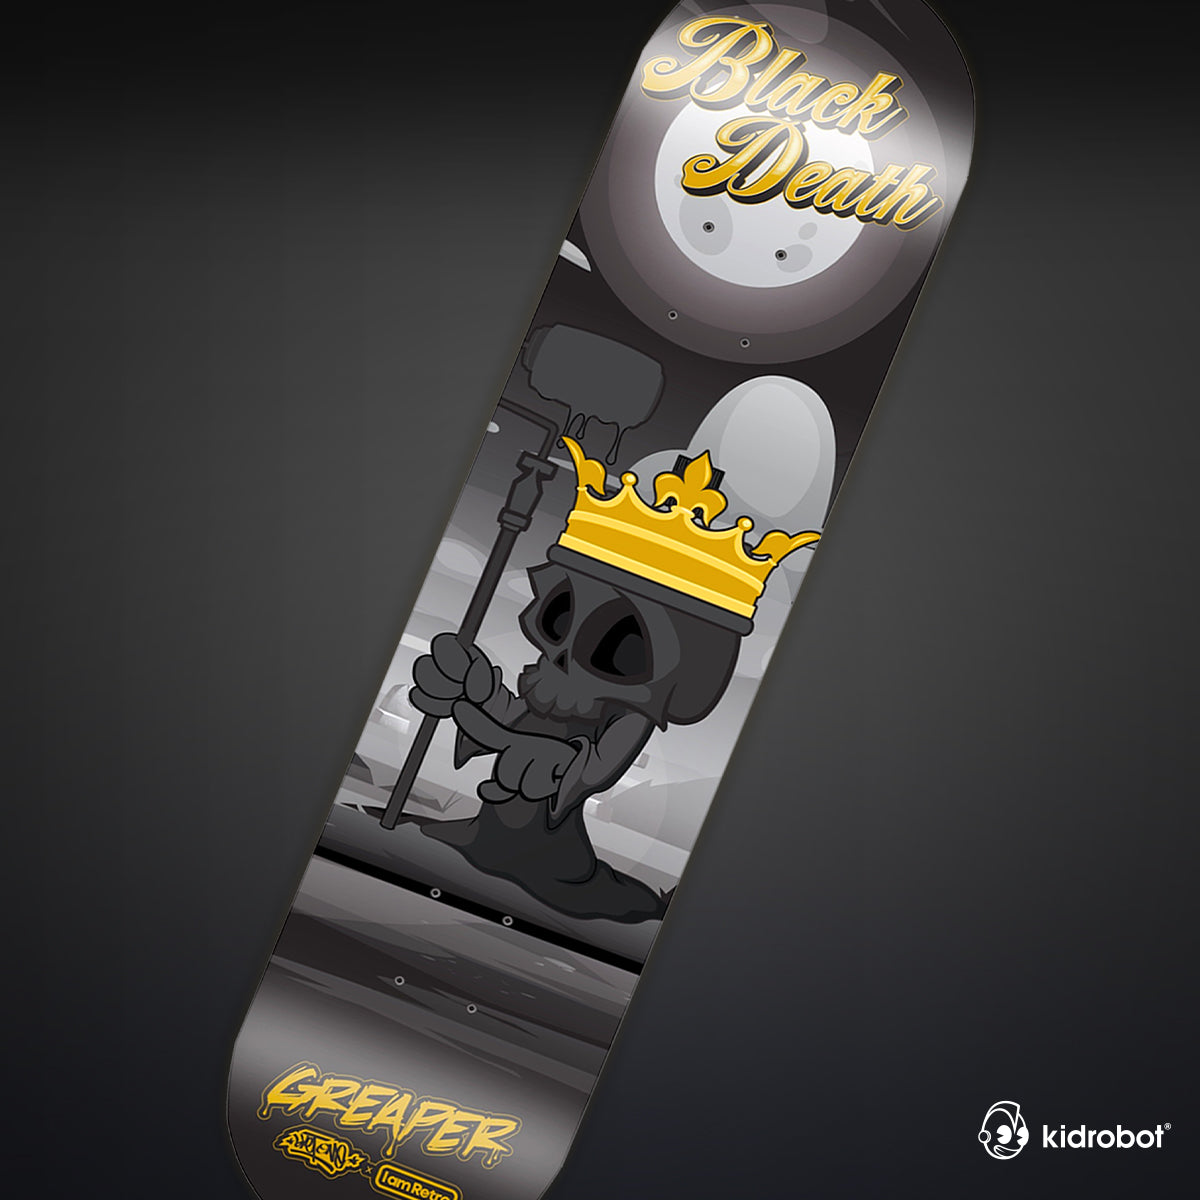 Greaper Skate Deck by Sket One - Black Death Edition (Limited Edition of 50) - Kidrobot